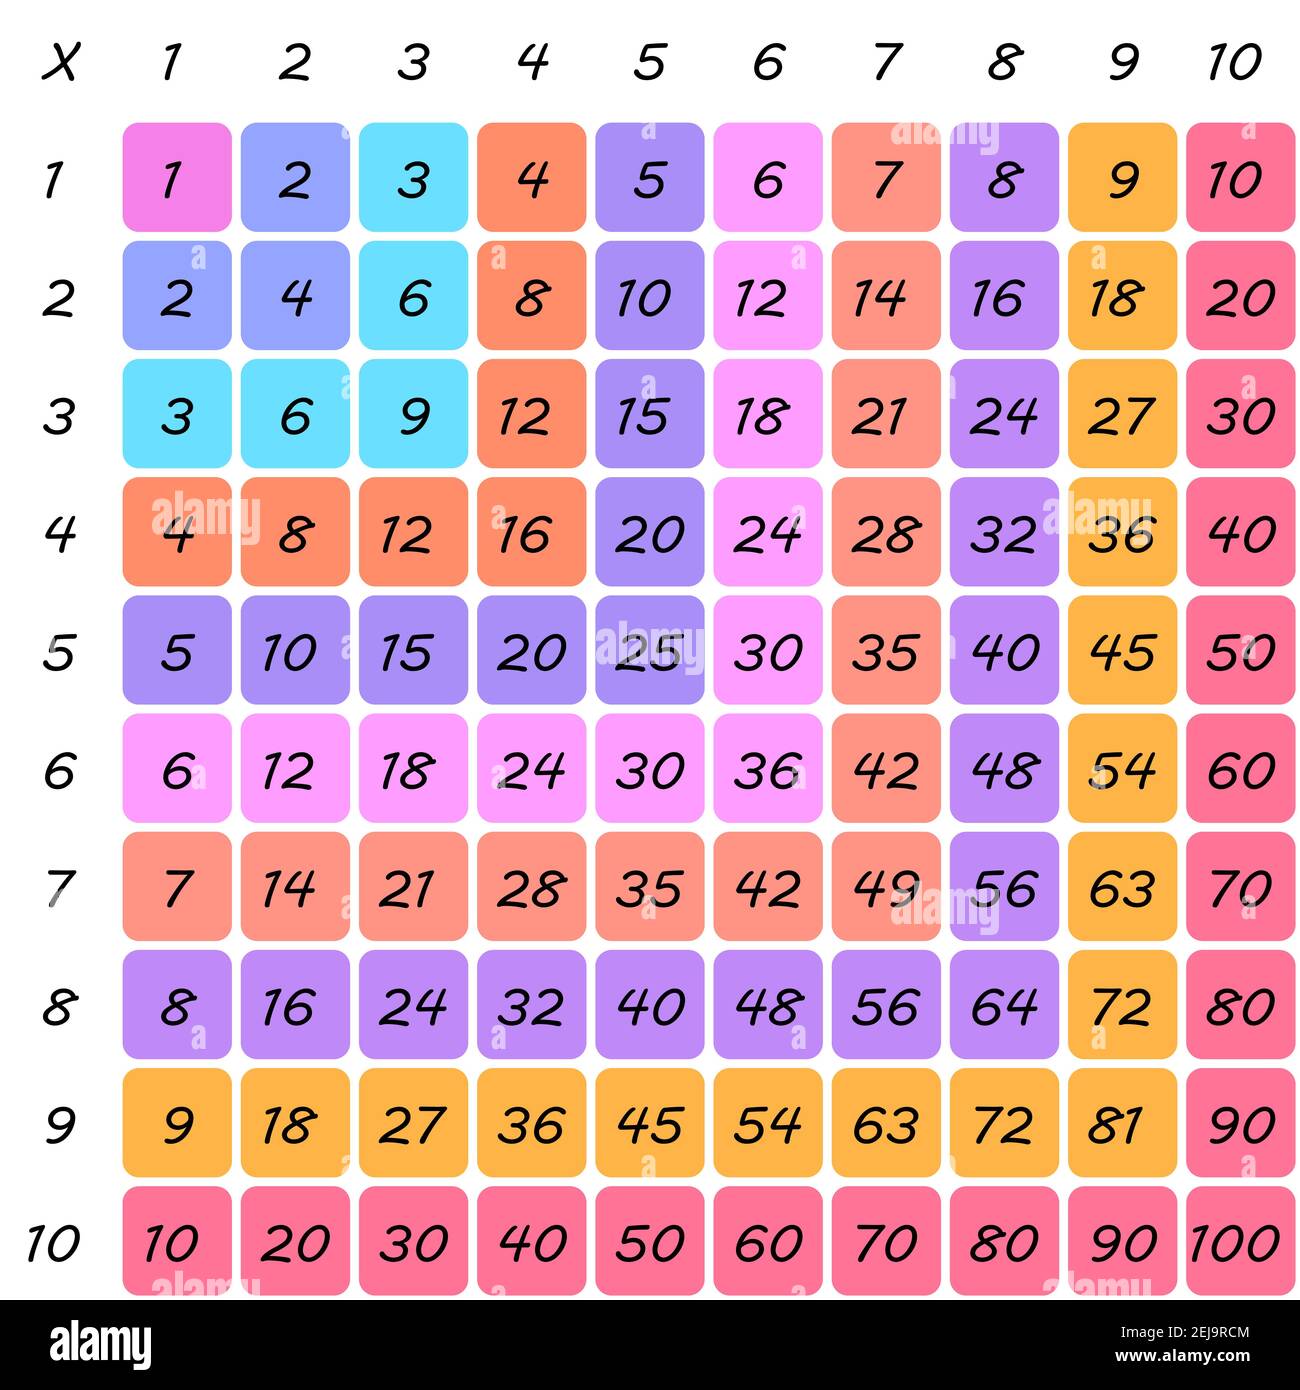 Multiplication Square. School vector illustration with colorful ...